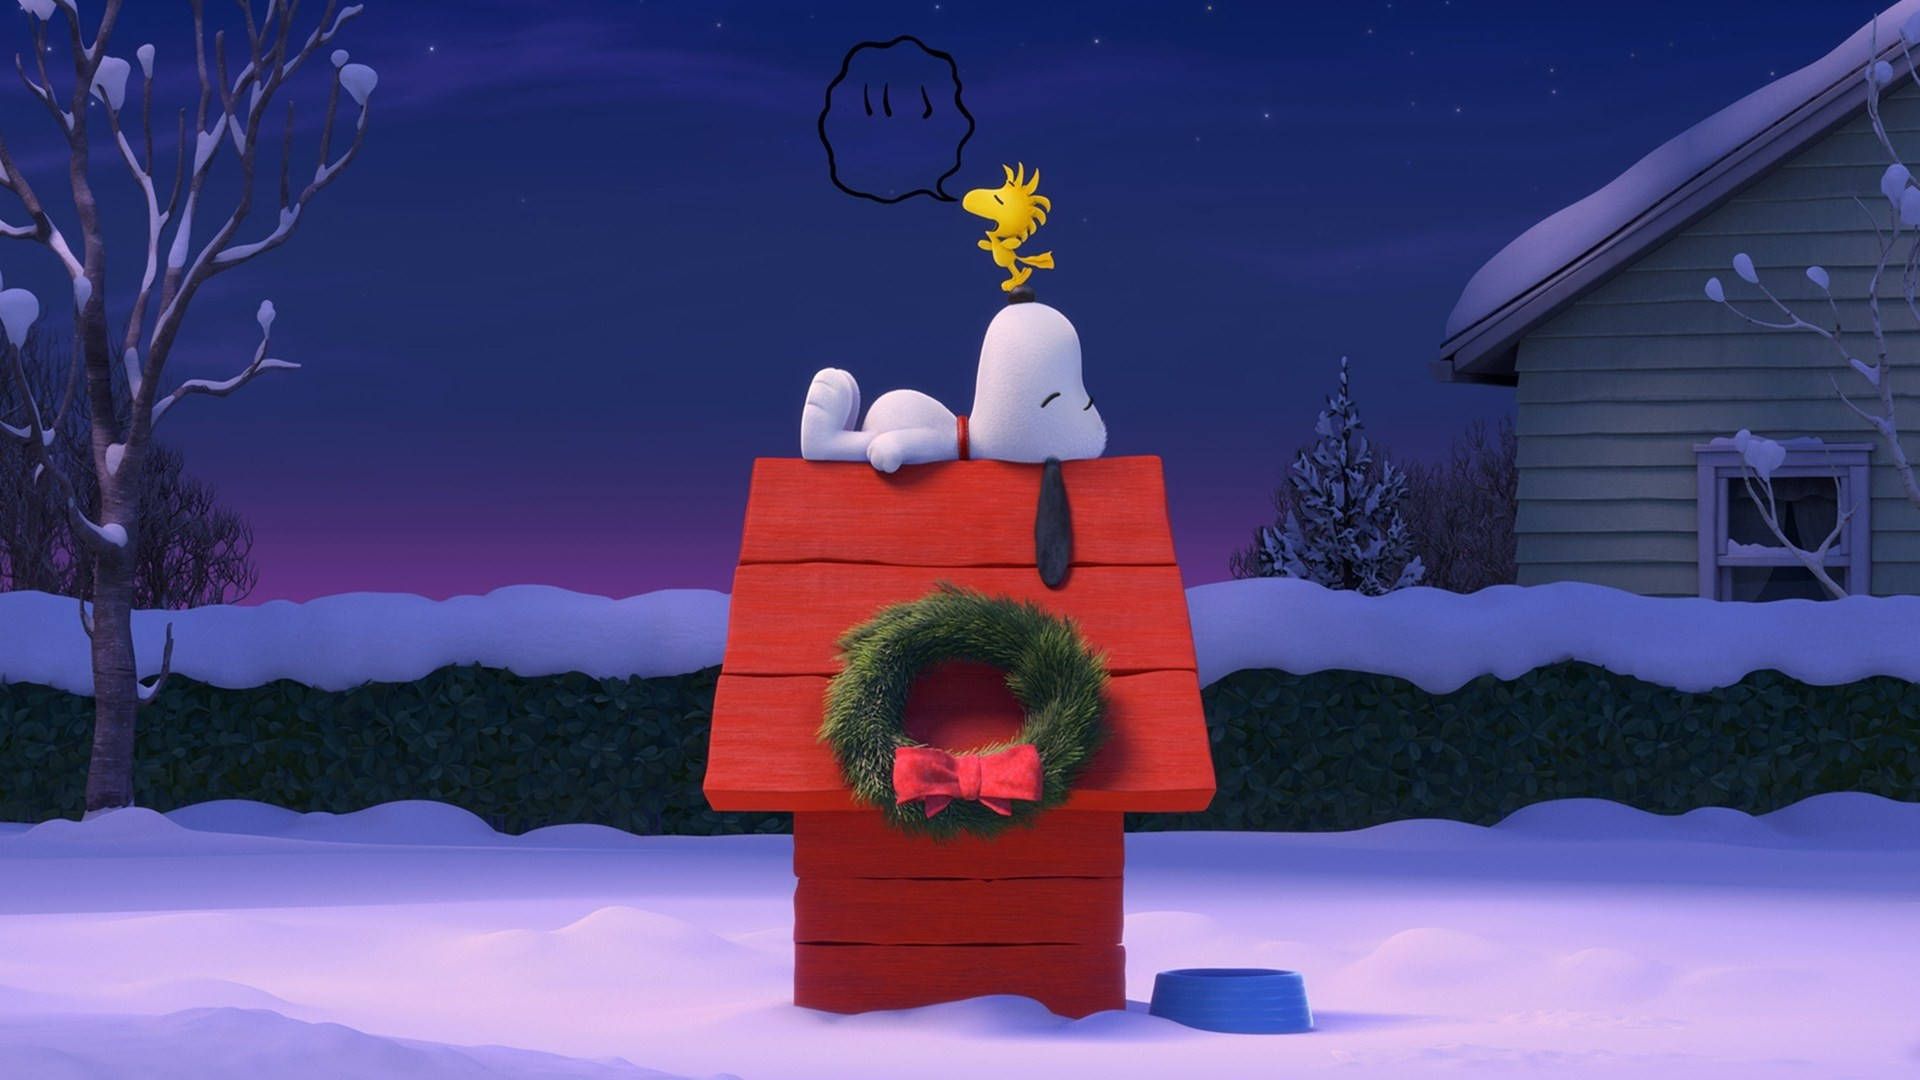 Enjoy Christmas cheer with Snoopy and his friends! Wallpaper